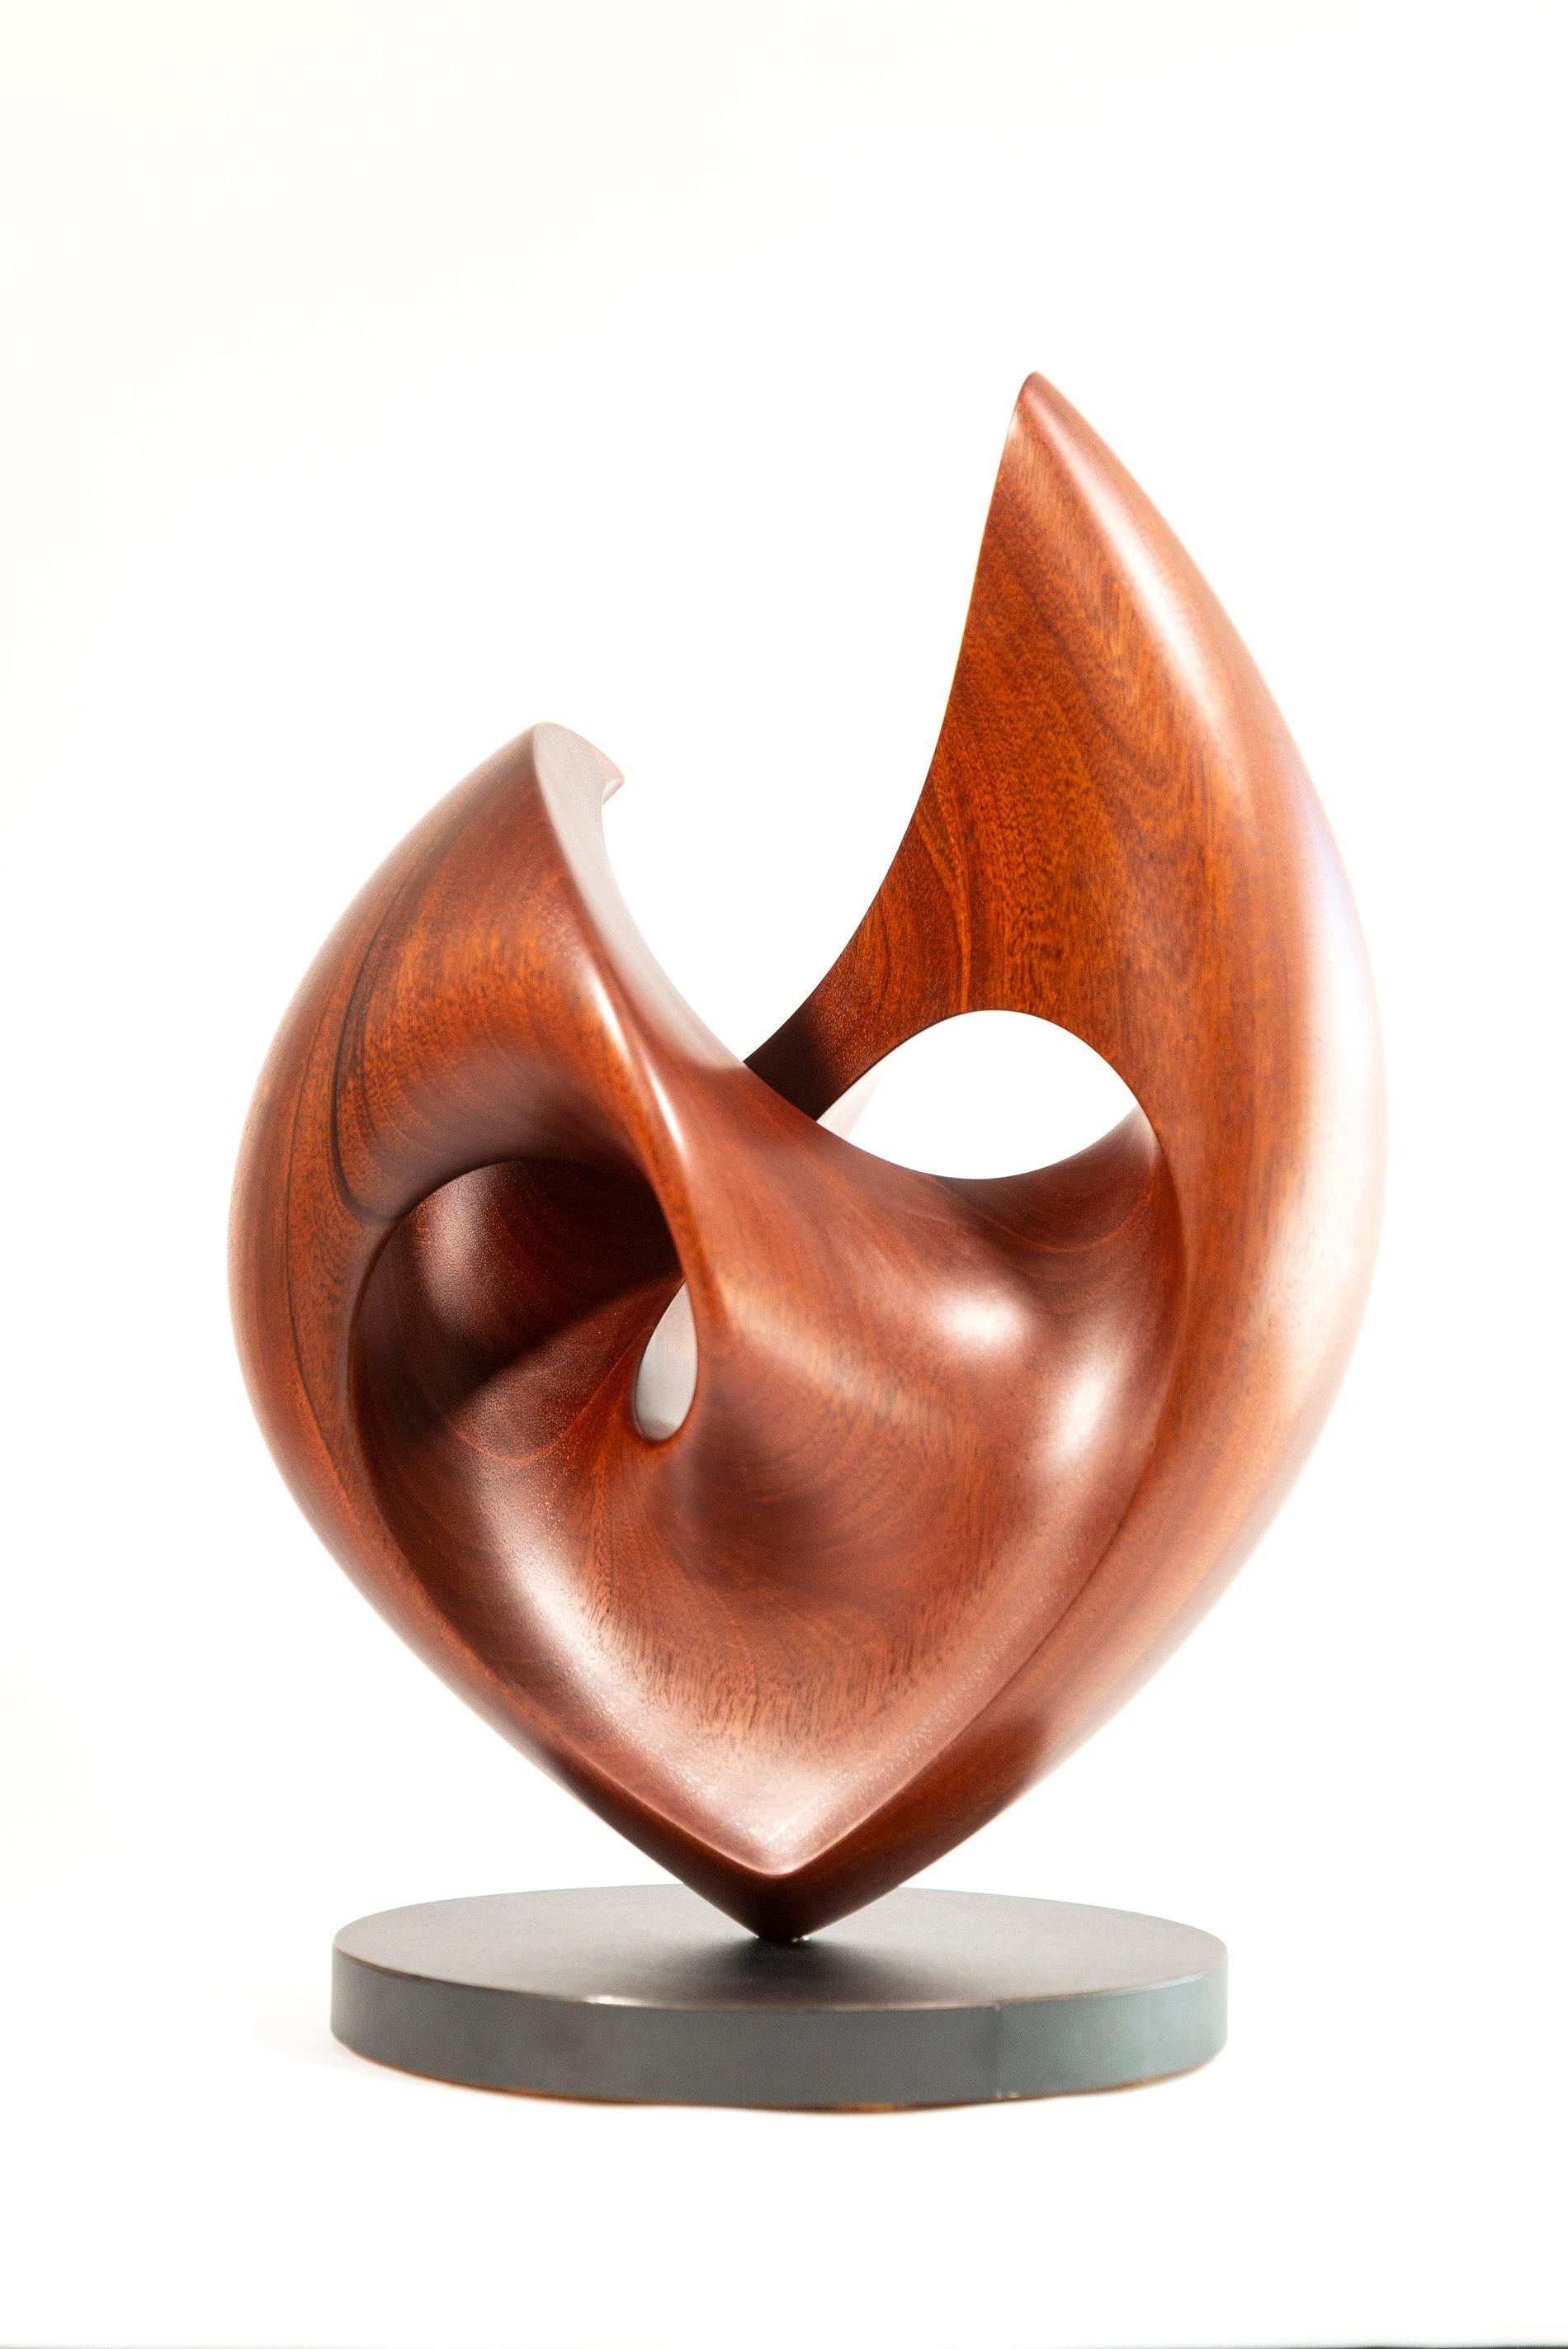 Senza Misura - smooth, polished, abstract, contemporary, mahogany sculpture For Sale 2